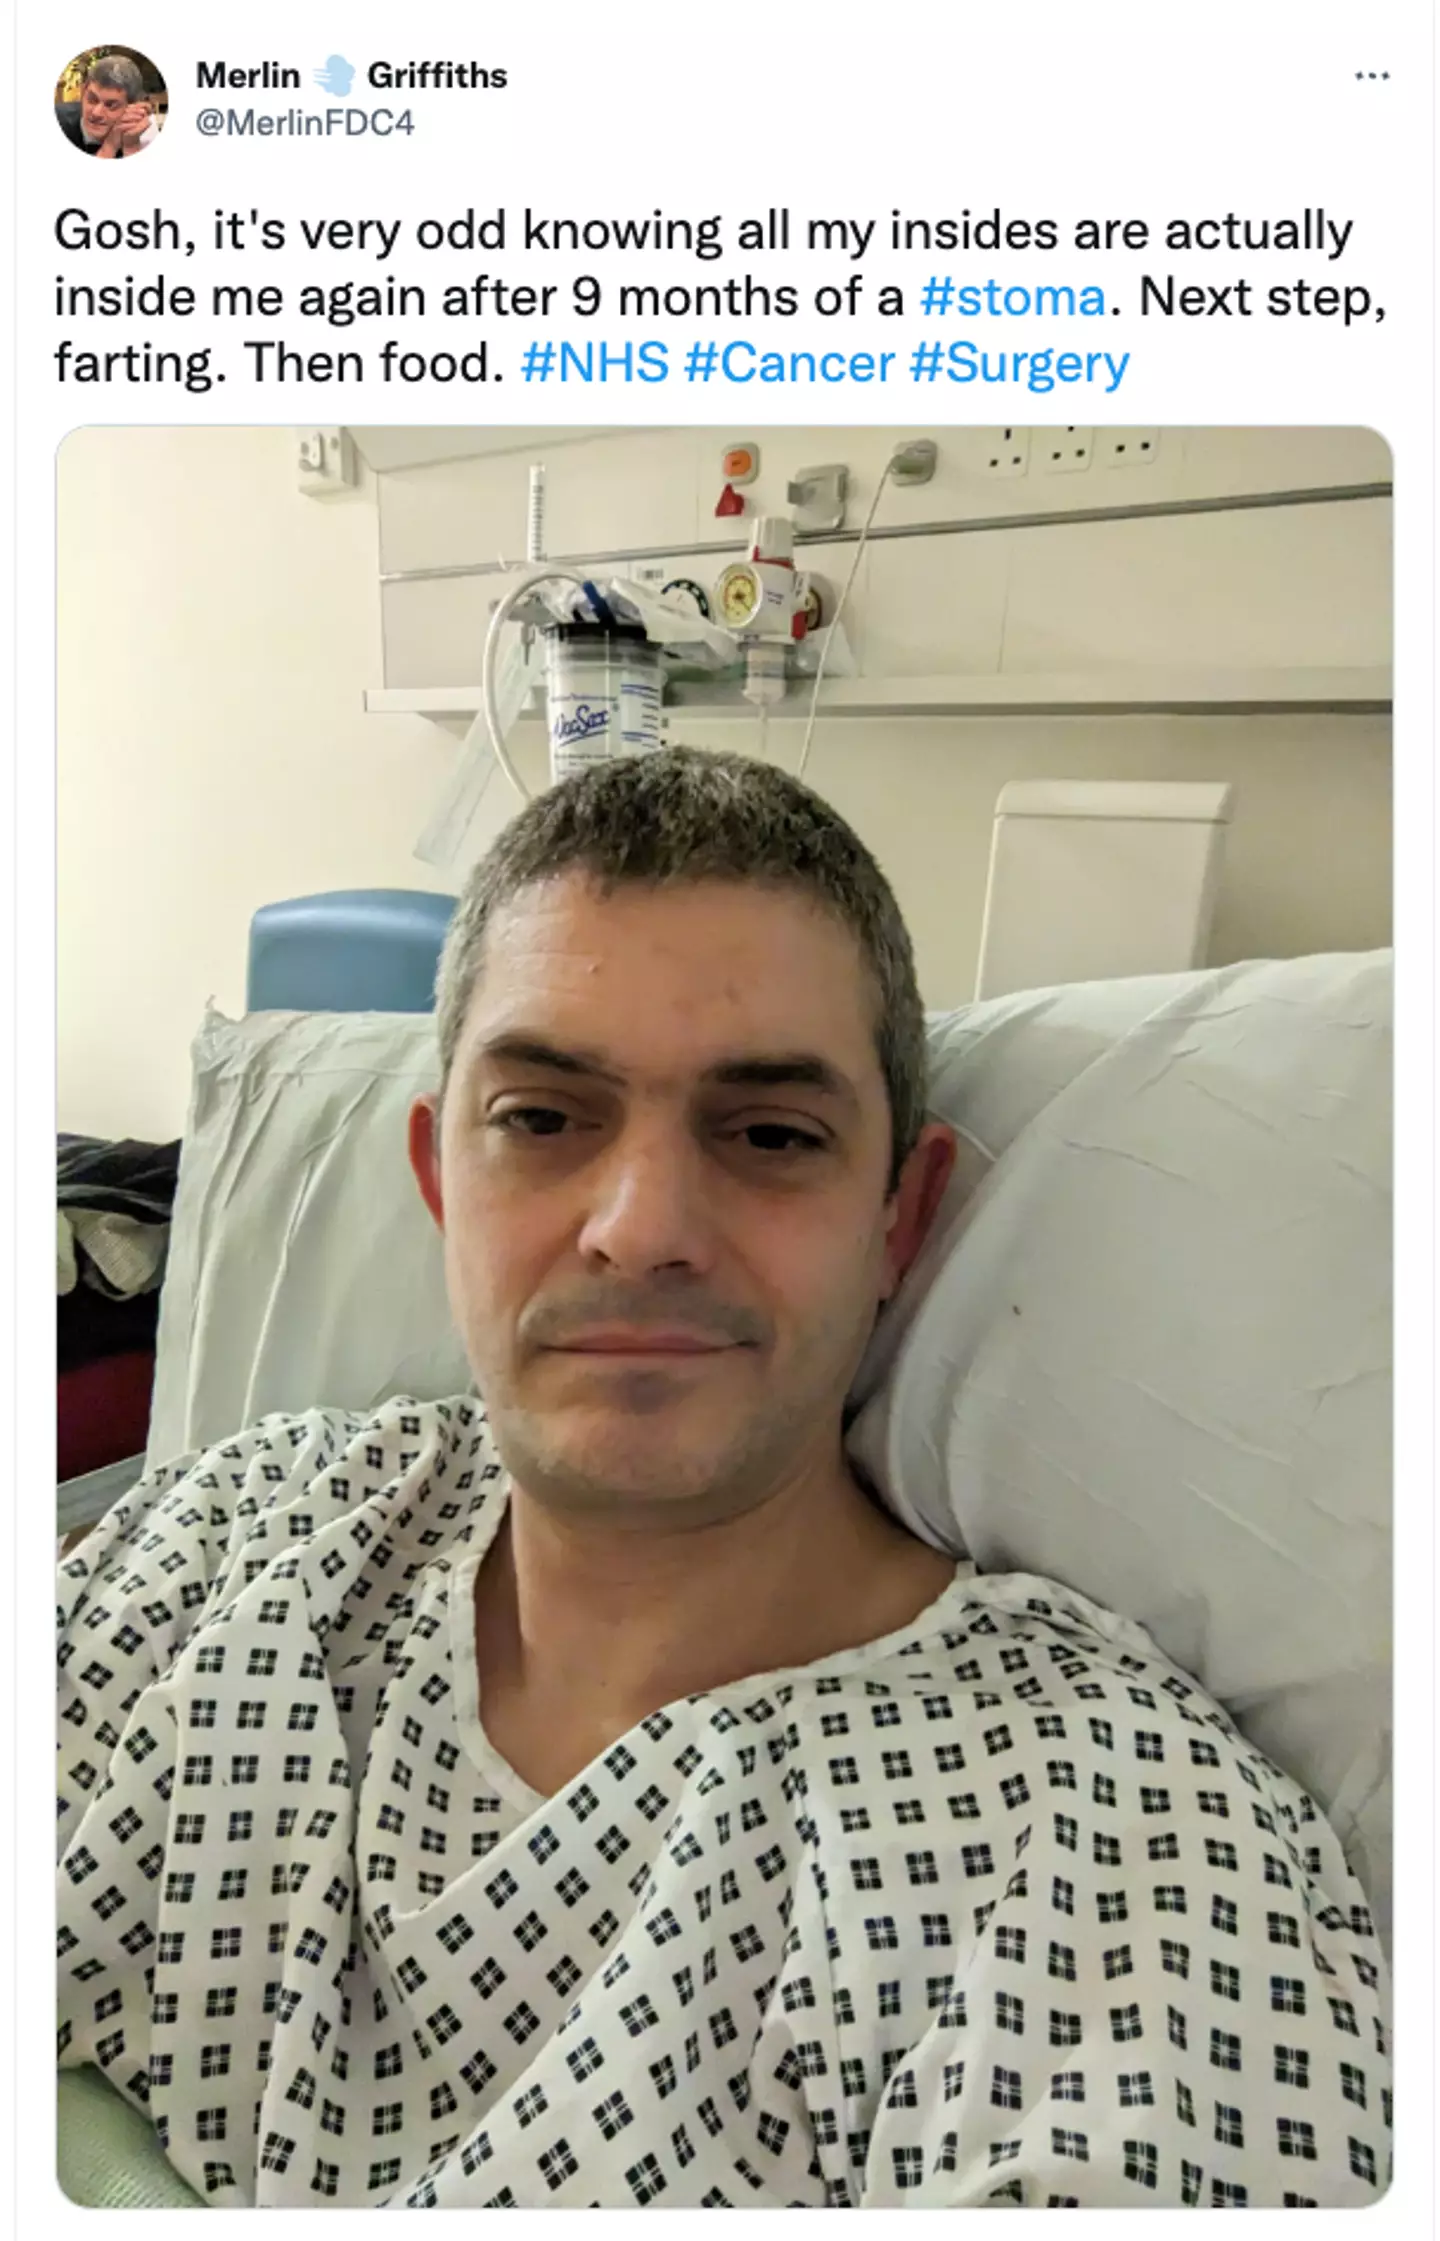 Merlin gave an update from his hospital bed.